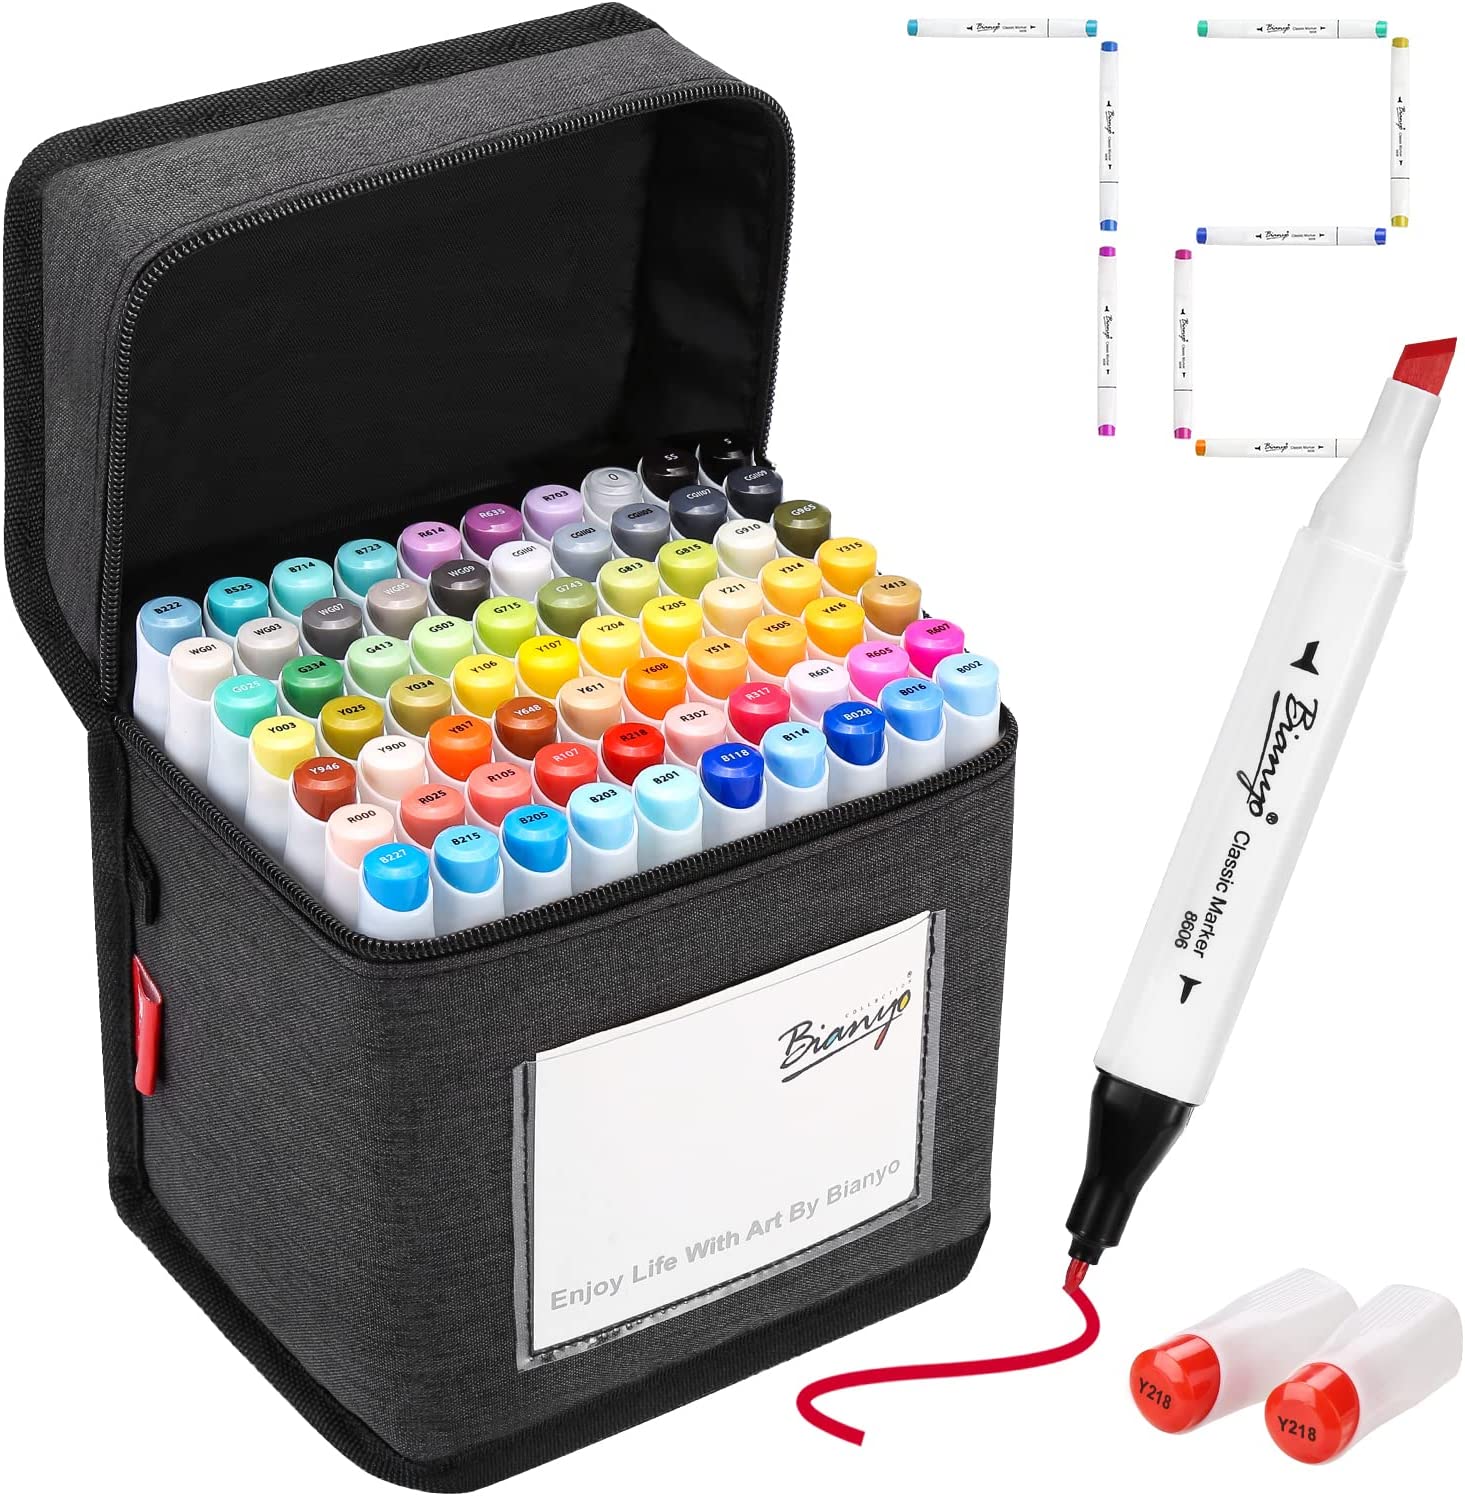 Bianyo Classic Series Alcohol-based Dual Tip Art Markers, Set of 72, Travel Case - image 1 of 8